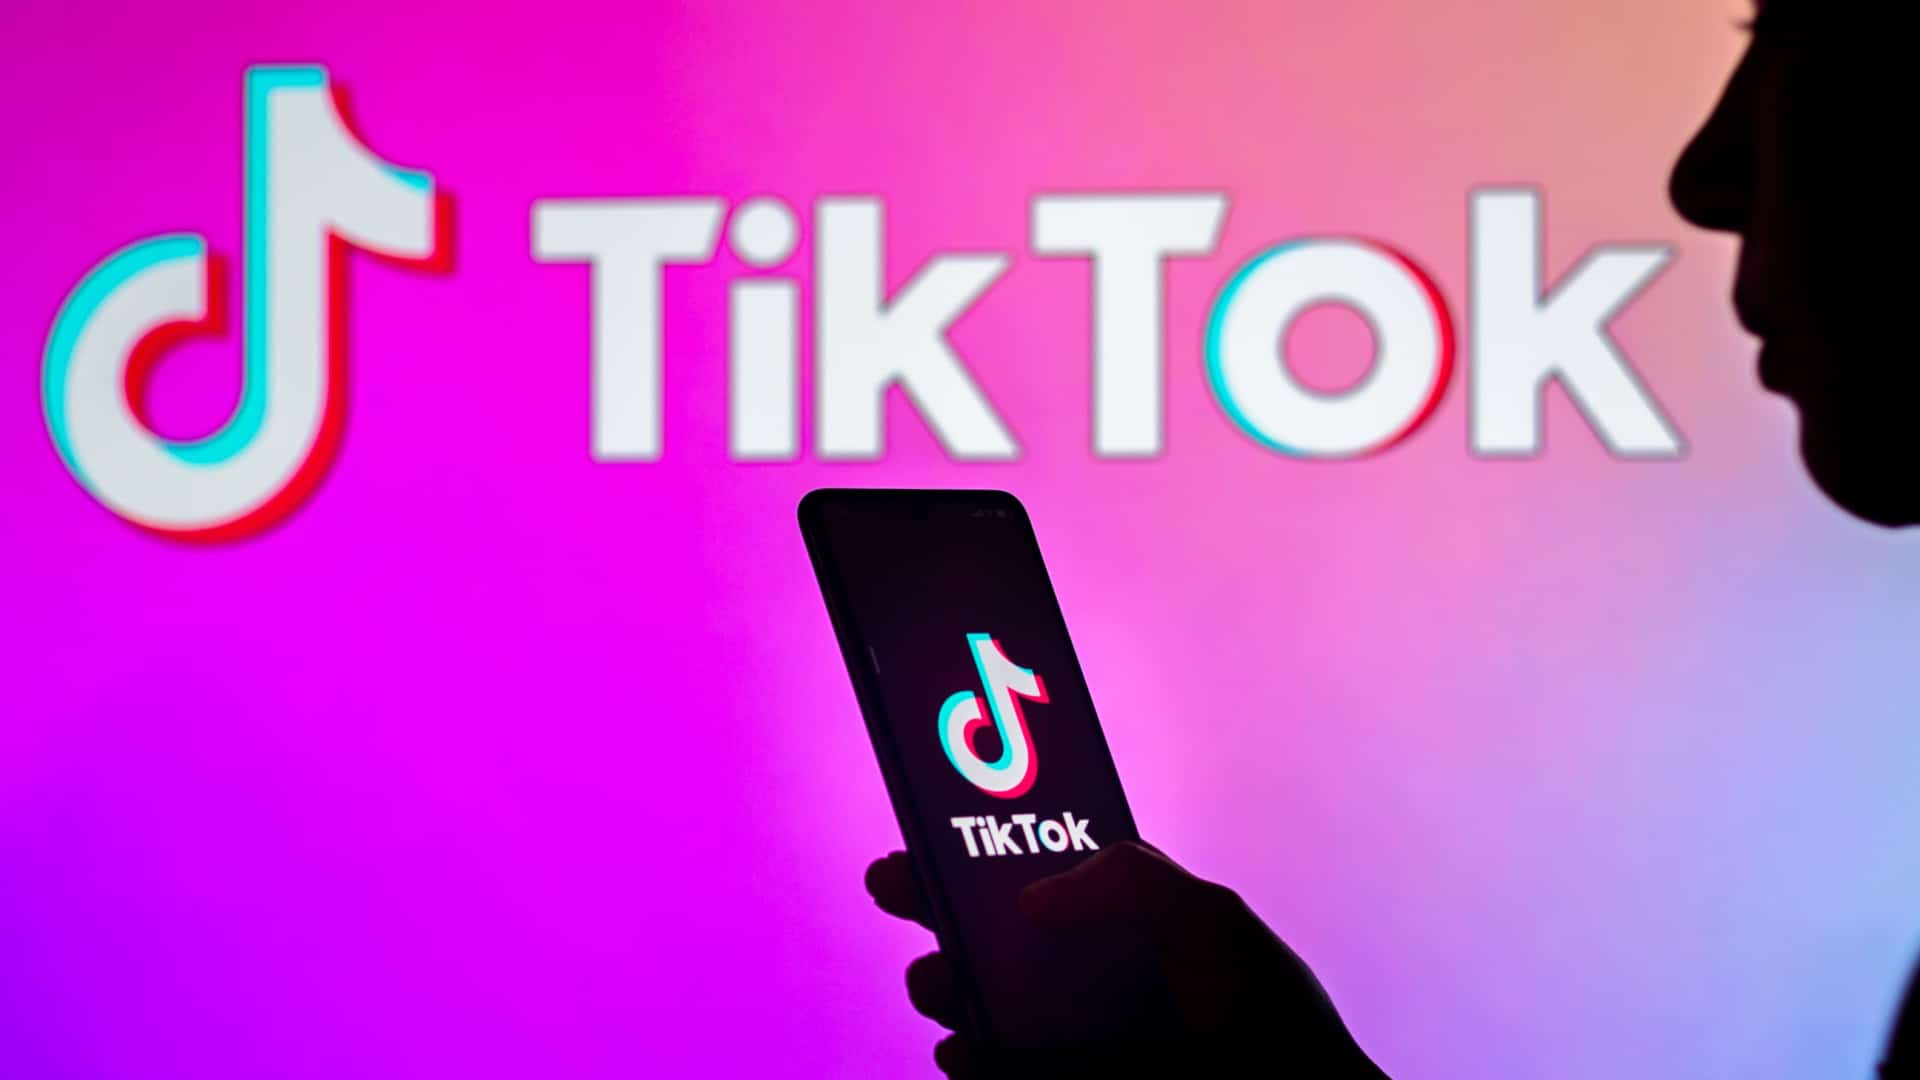 Leveraging TikTok’s ad content to get valuable insights on top-performing products